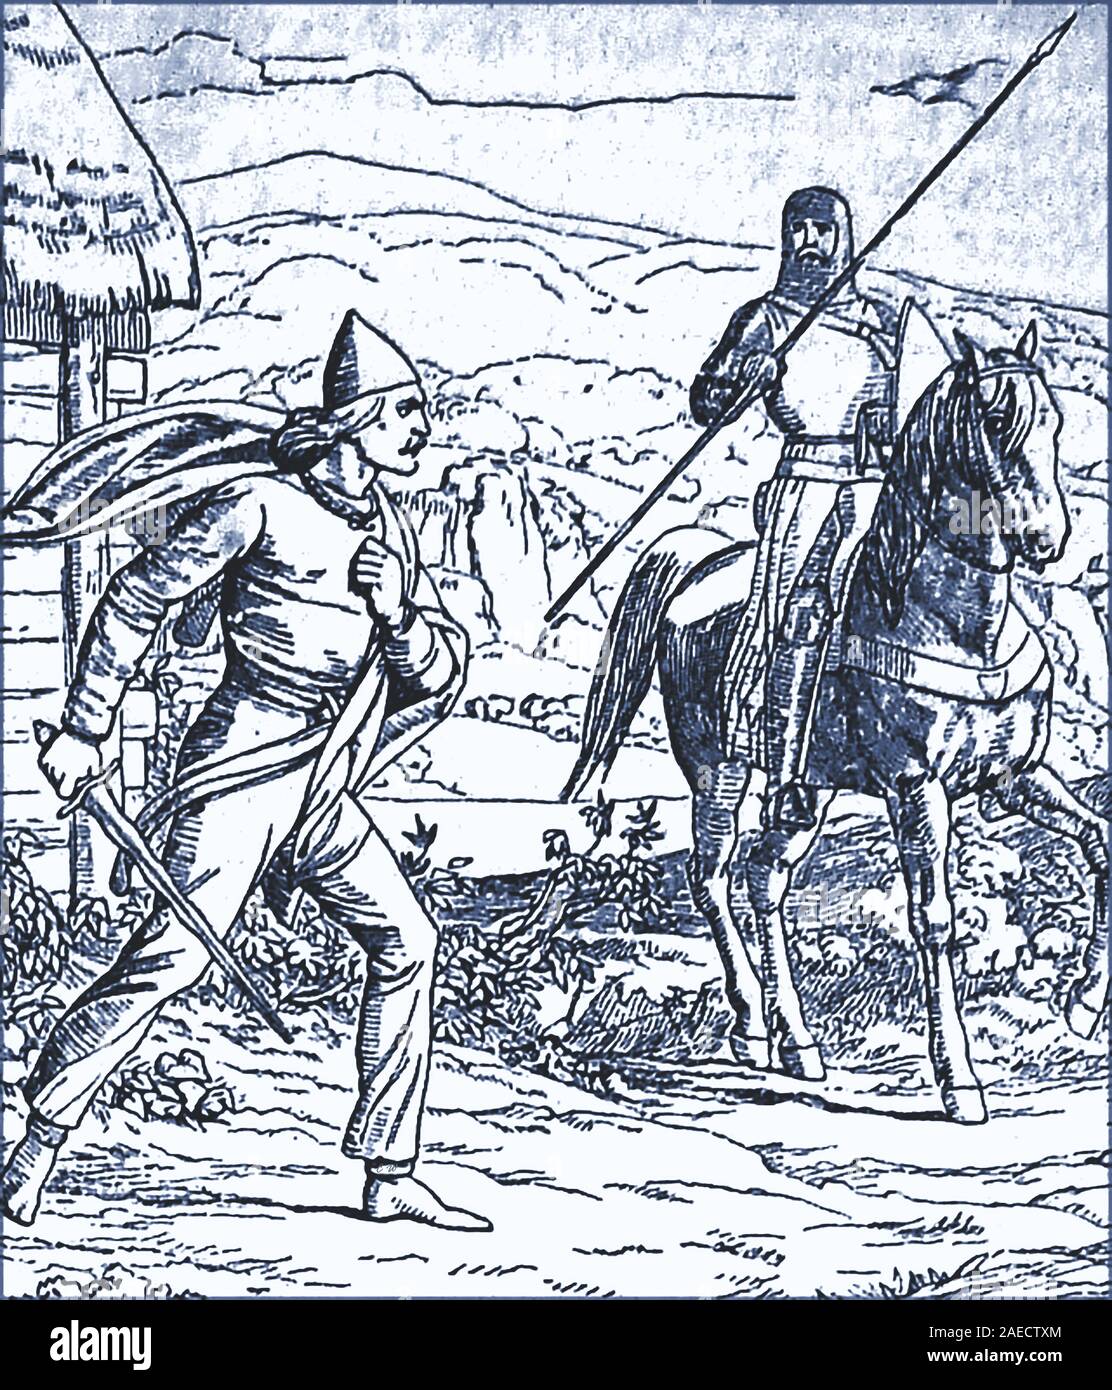 An early  line illustrations showing  the death of LLewelyn last of the Welsh princes (left) and Stephen de Frankton who killed him.  - Llewelyn, aka Llewelyn  ap Gruffydd , Llywelyn the Last , Llywelyn Yr Ail , Llywelyn II, Llywelyn Ein Llyw Olaf, The last true Prince of Wales and  Tywysog Cymru, lived  1223-1282 and   was the last sovereign prince of Wales before its conquest by Edward I of England. He was killed at the Battle of Orewin Bridge (also known as the Battle of Irfon Bridge) at Builth Wells under suspicious circumstances involving personal deception. Stock Photo